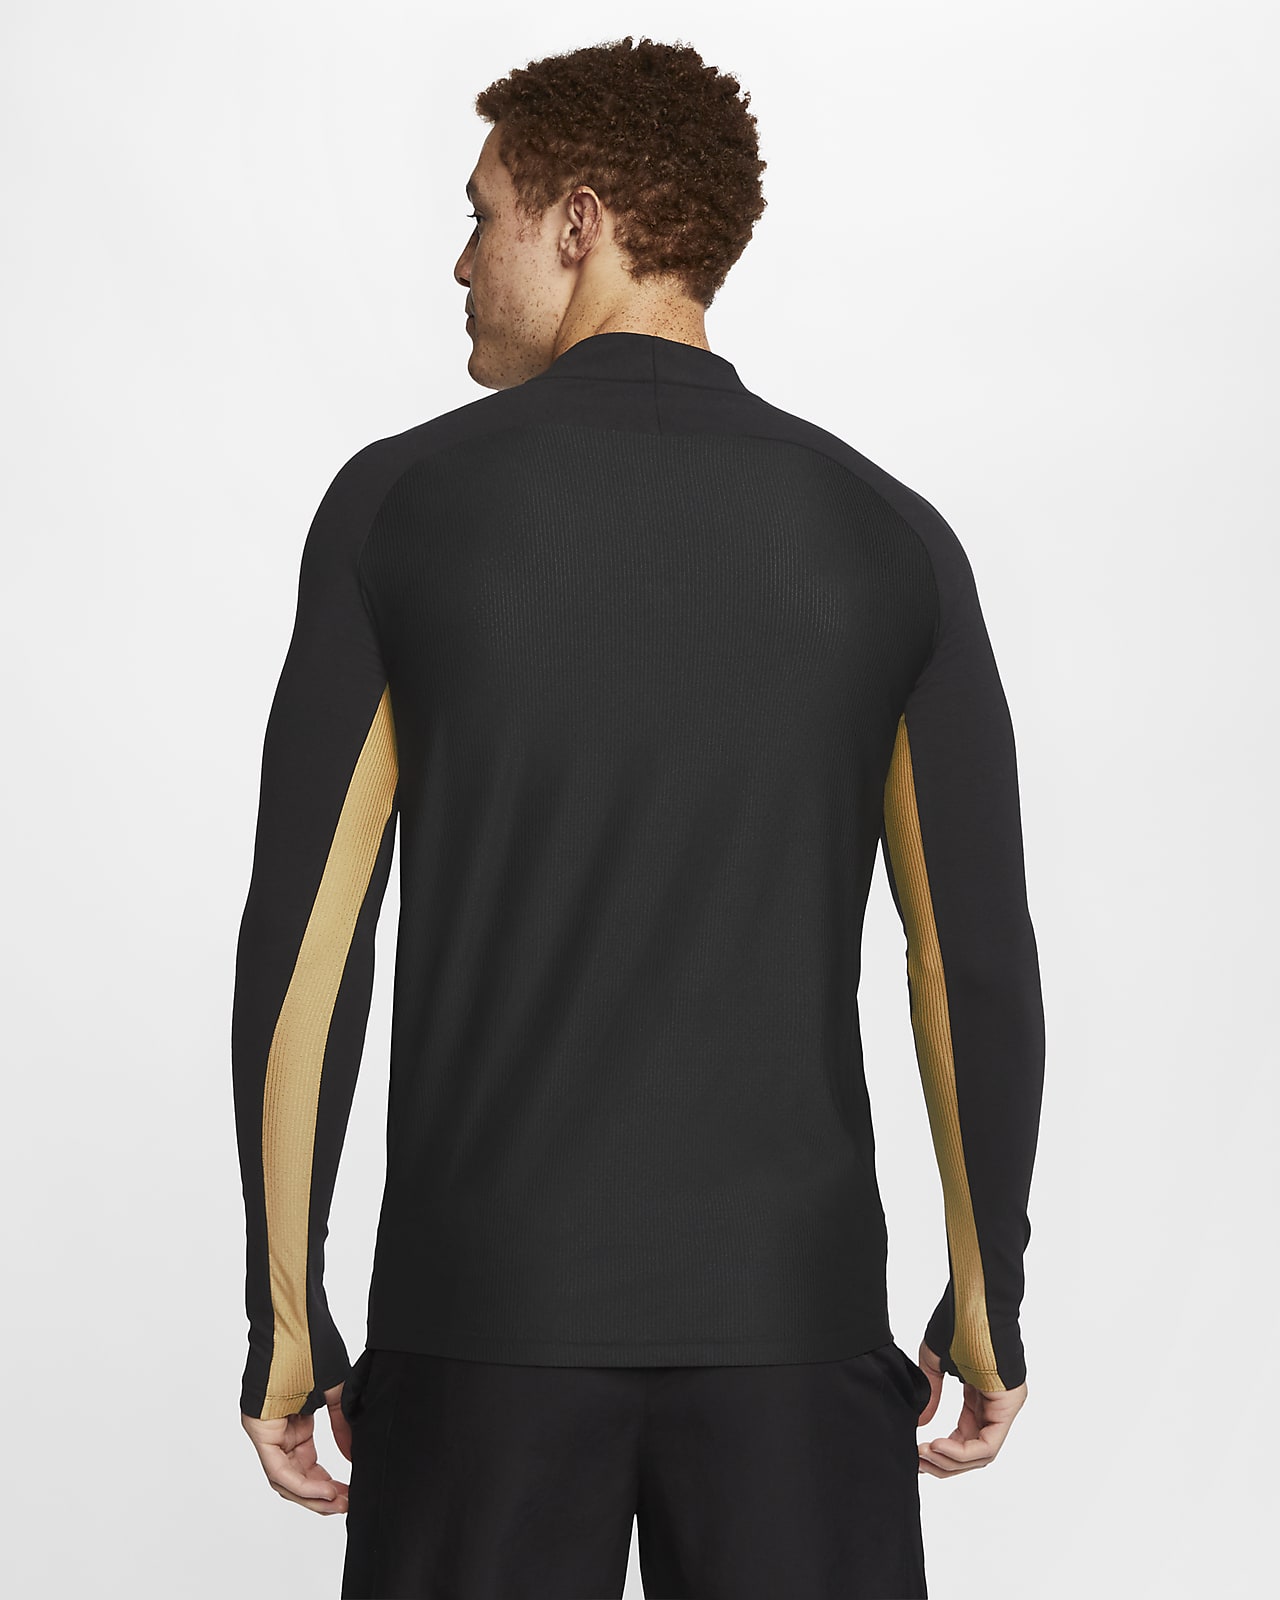 nike dry drill top